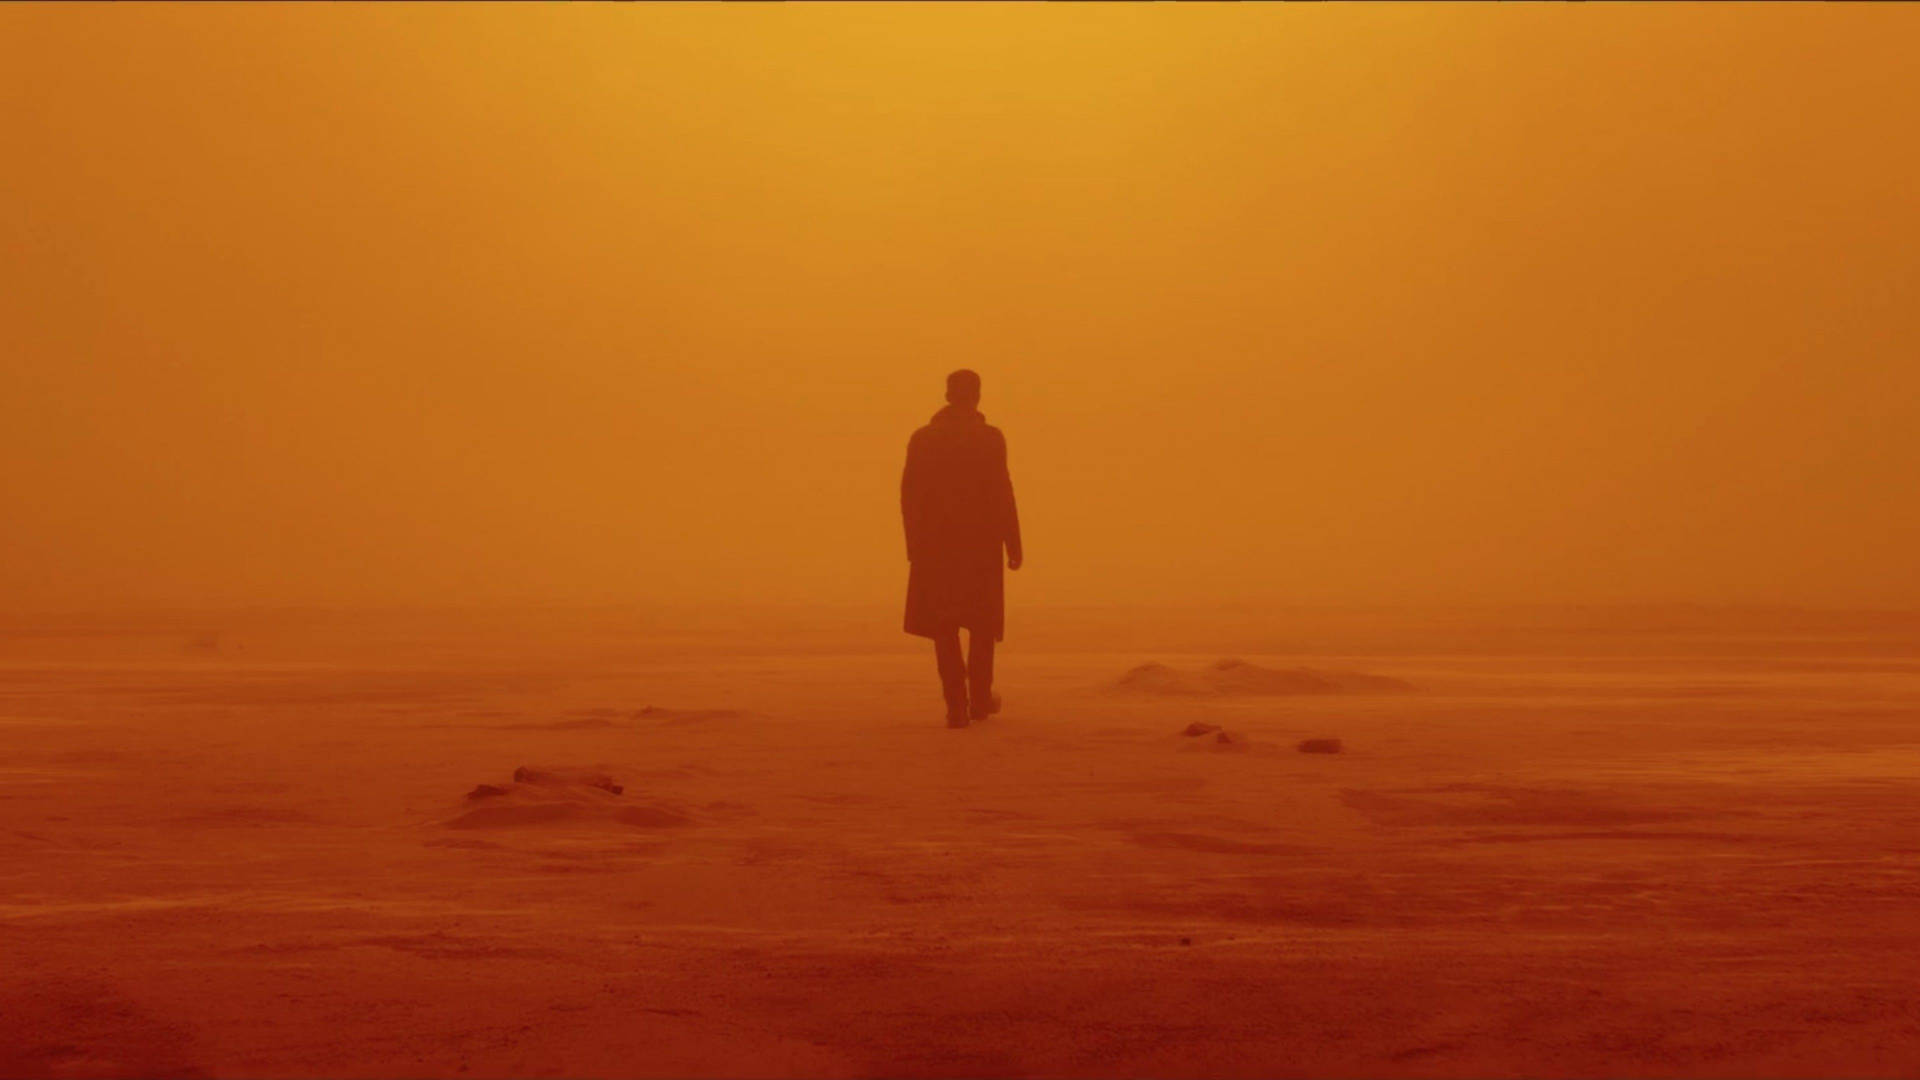 New characters join the cast in Blade Runner 2049 Wallpaper